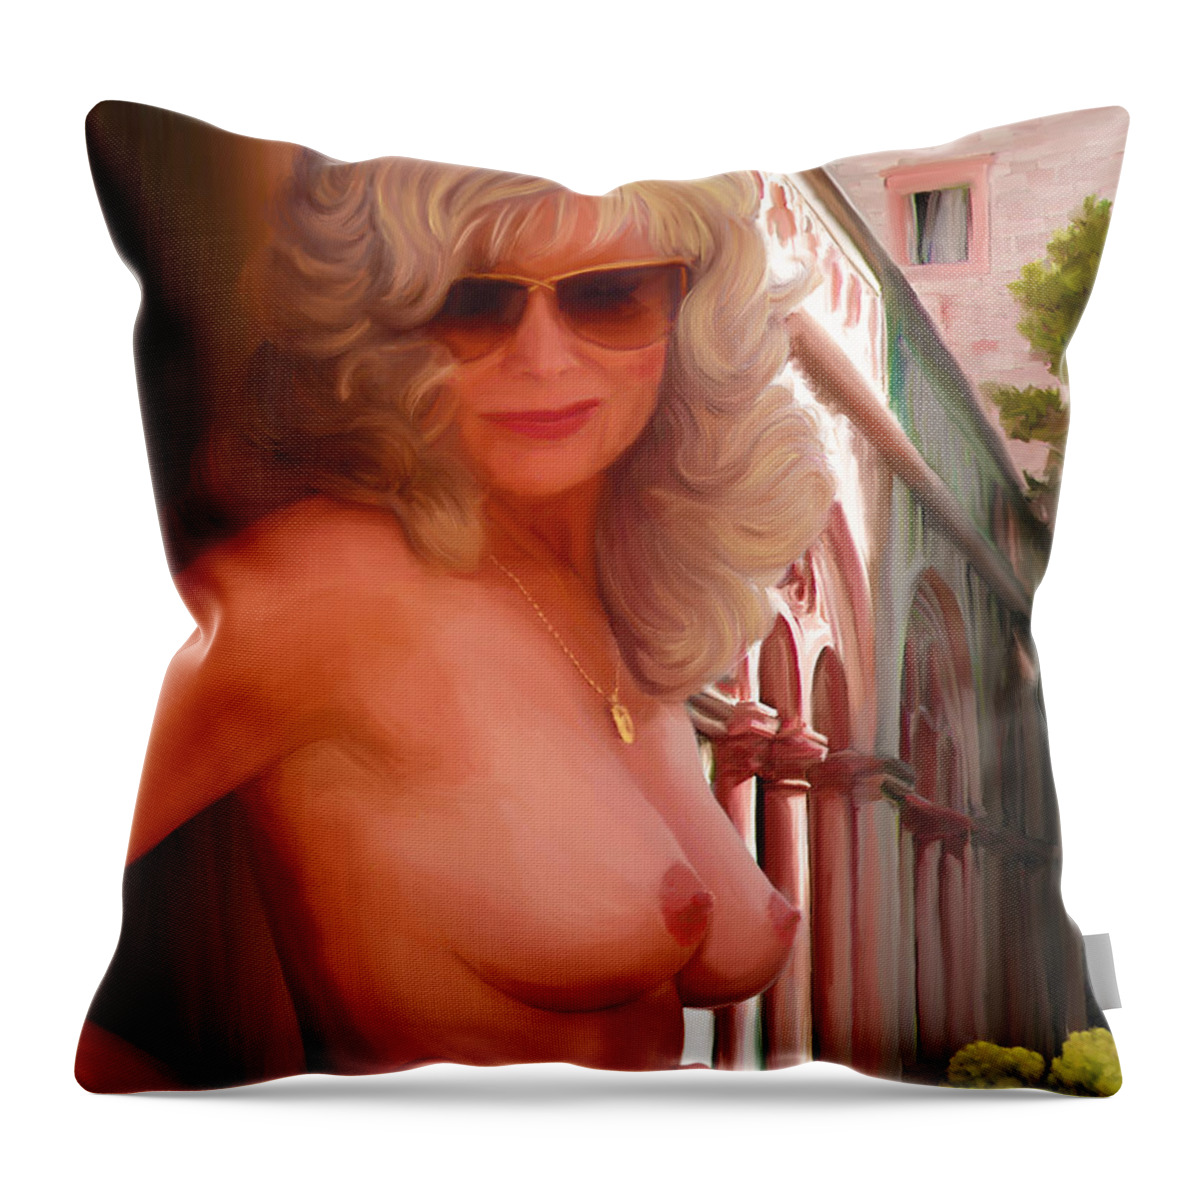 Erotic Throw Pillow featuring the painting Naked Italy by Shelby